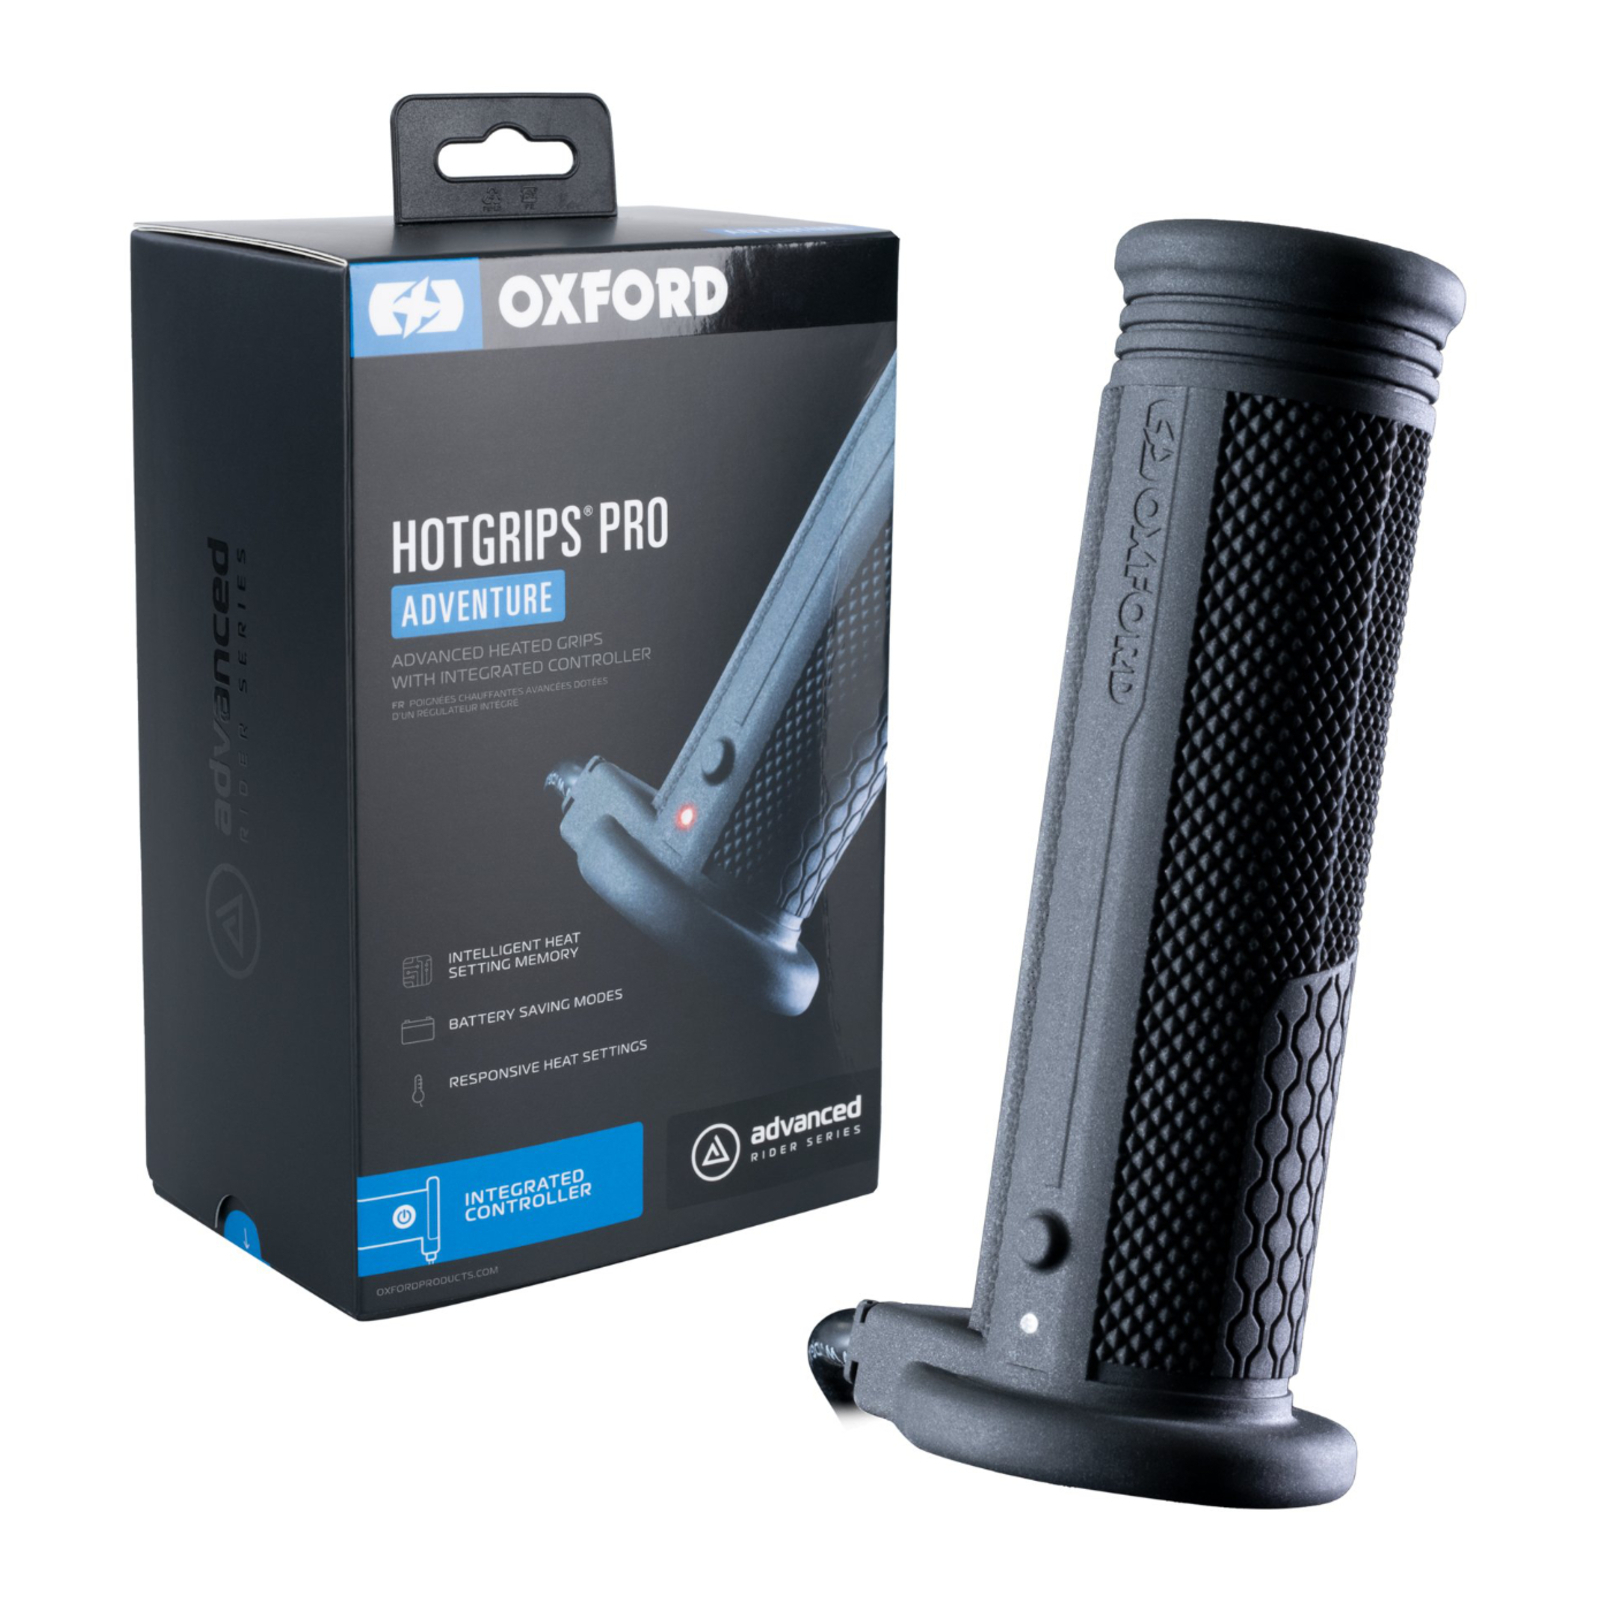 OXFORD HOTGRIPS PRO ADVENTURE (INTEGRATED)